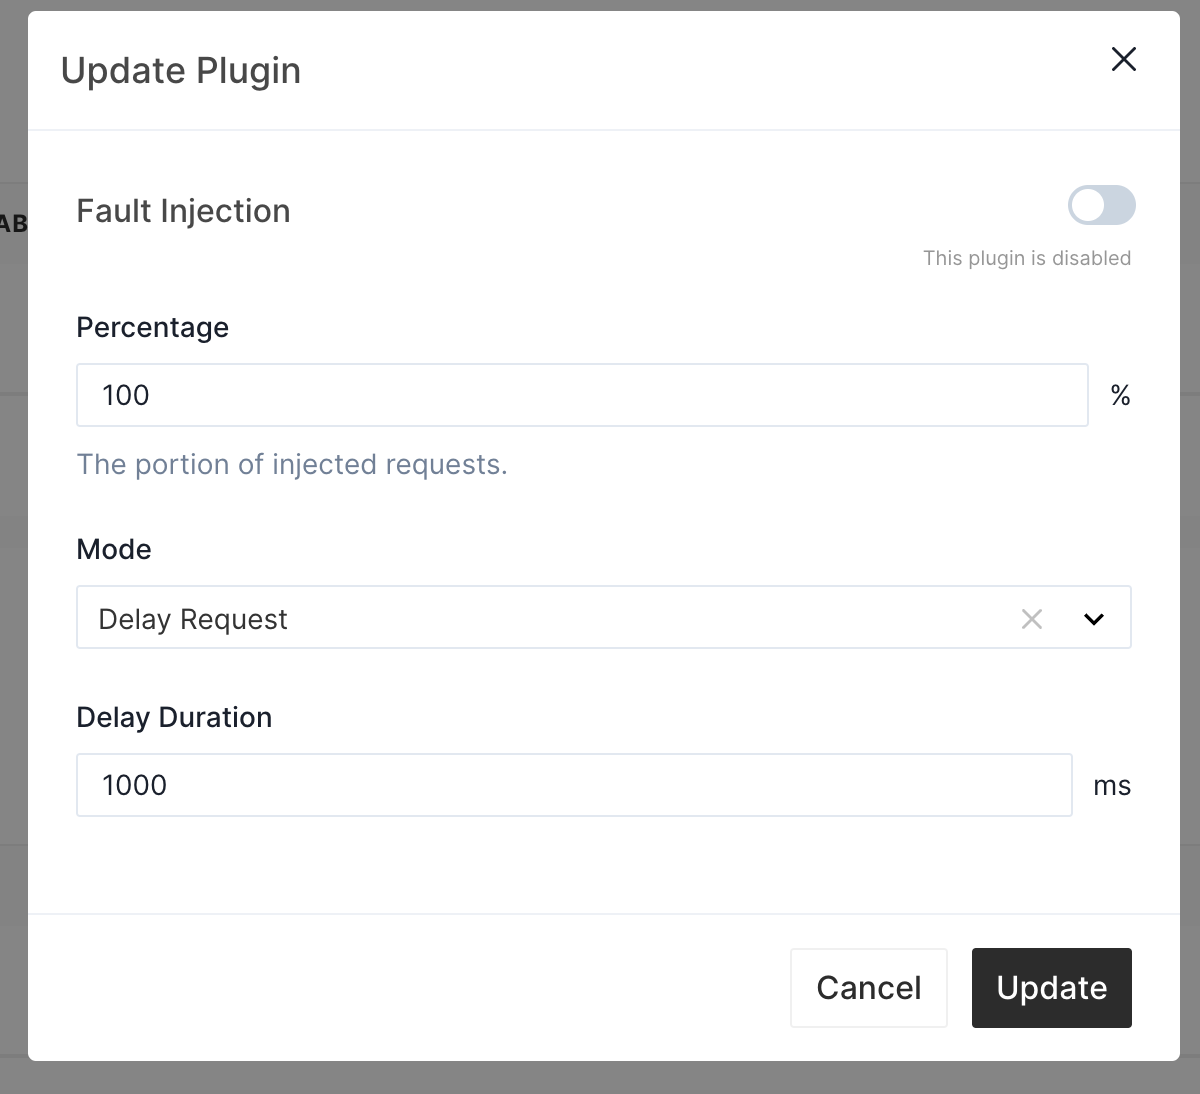 Update Fault Injection Plugin Delay